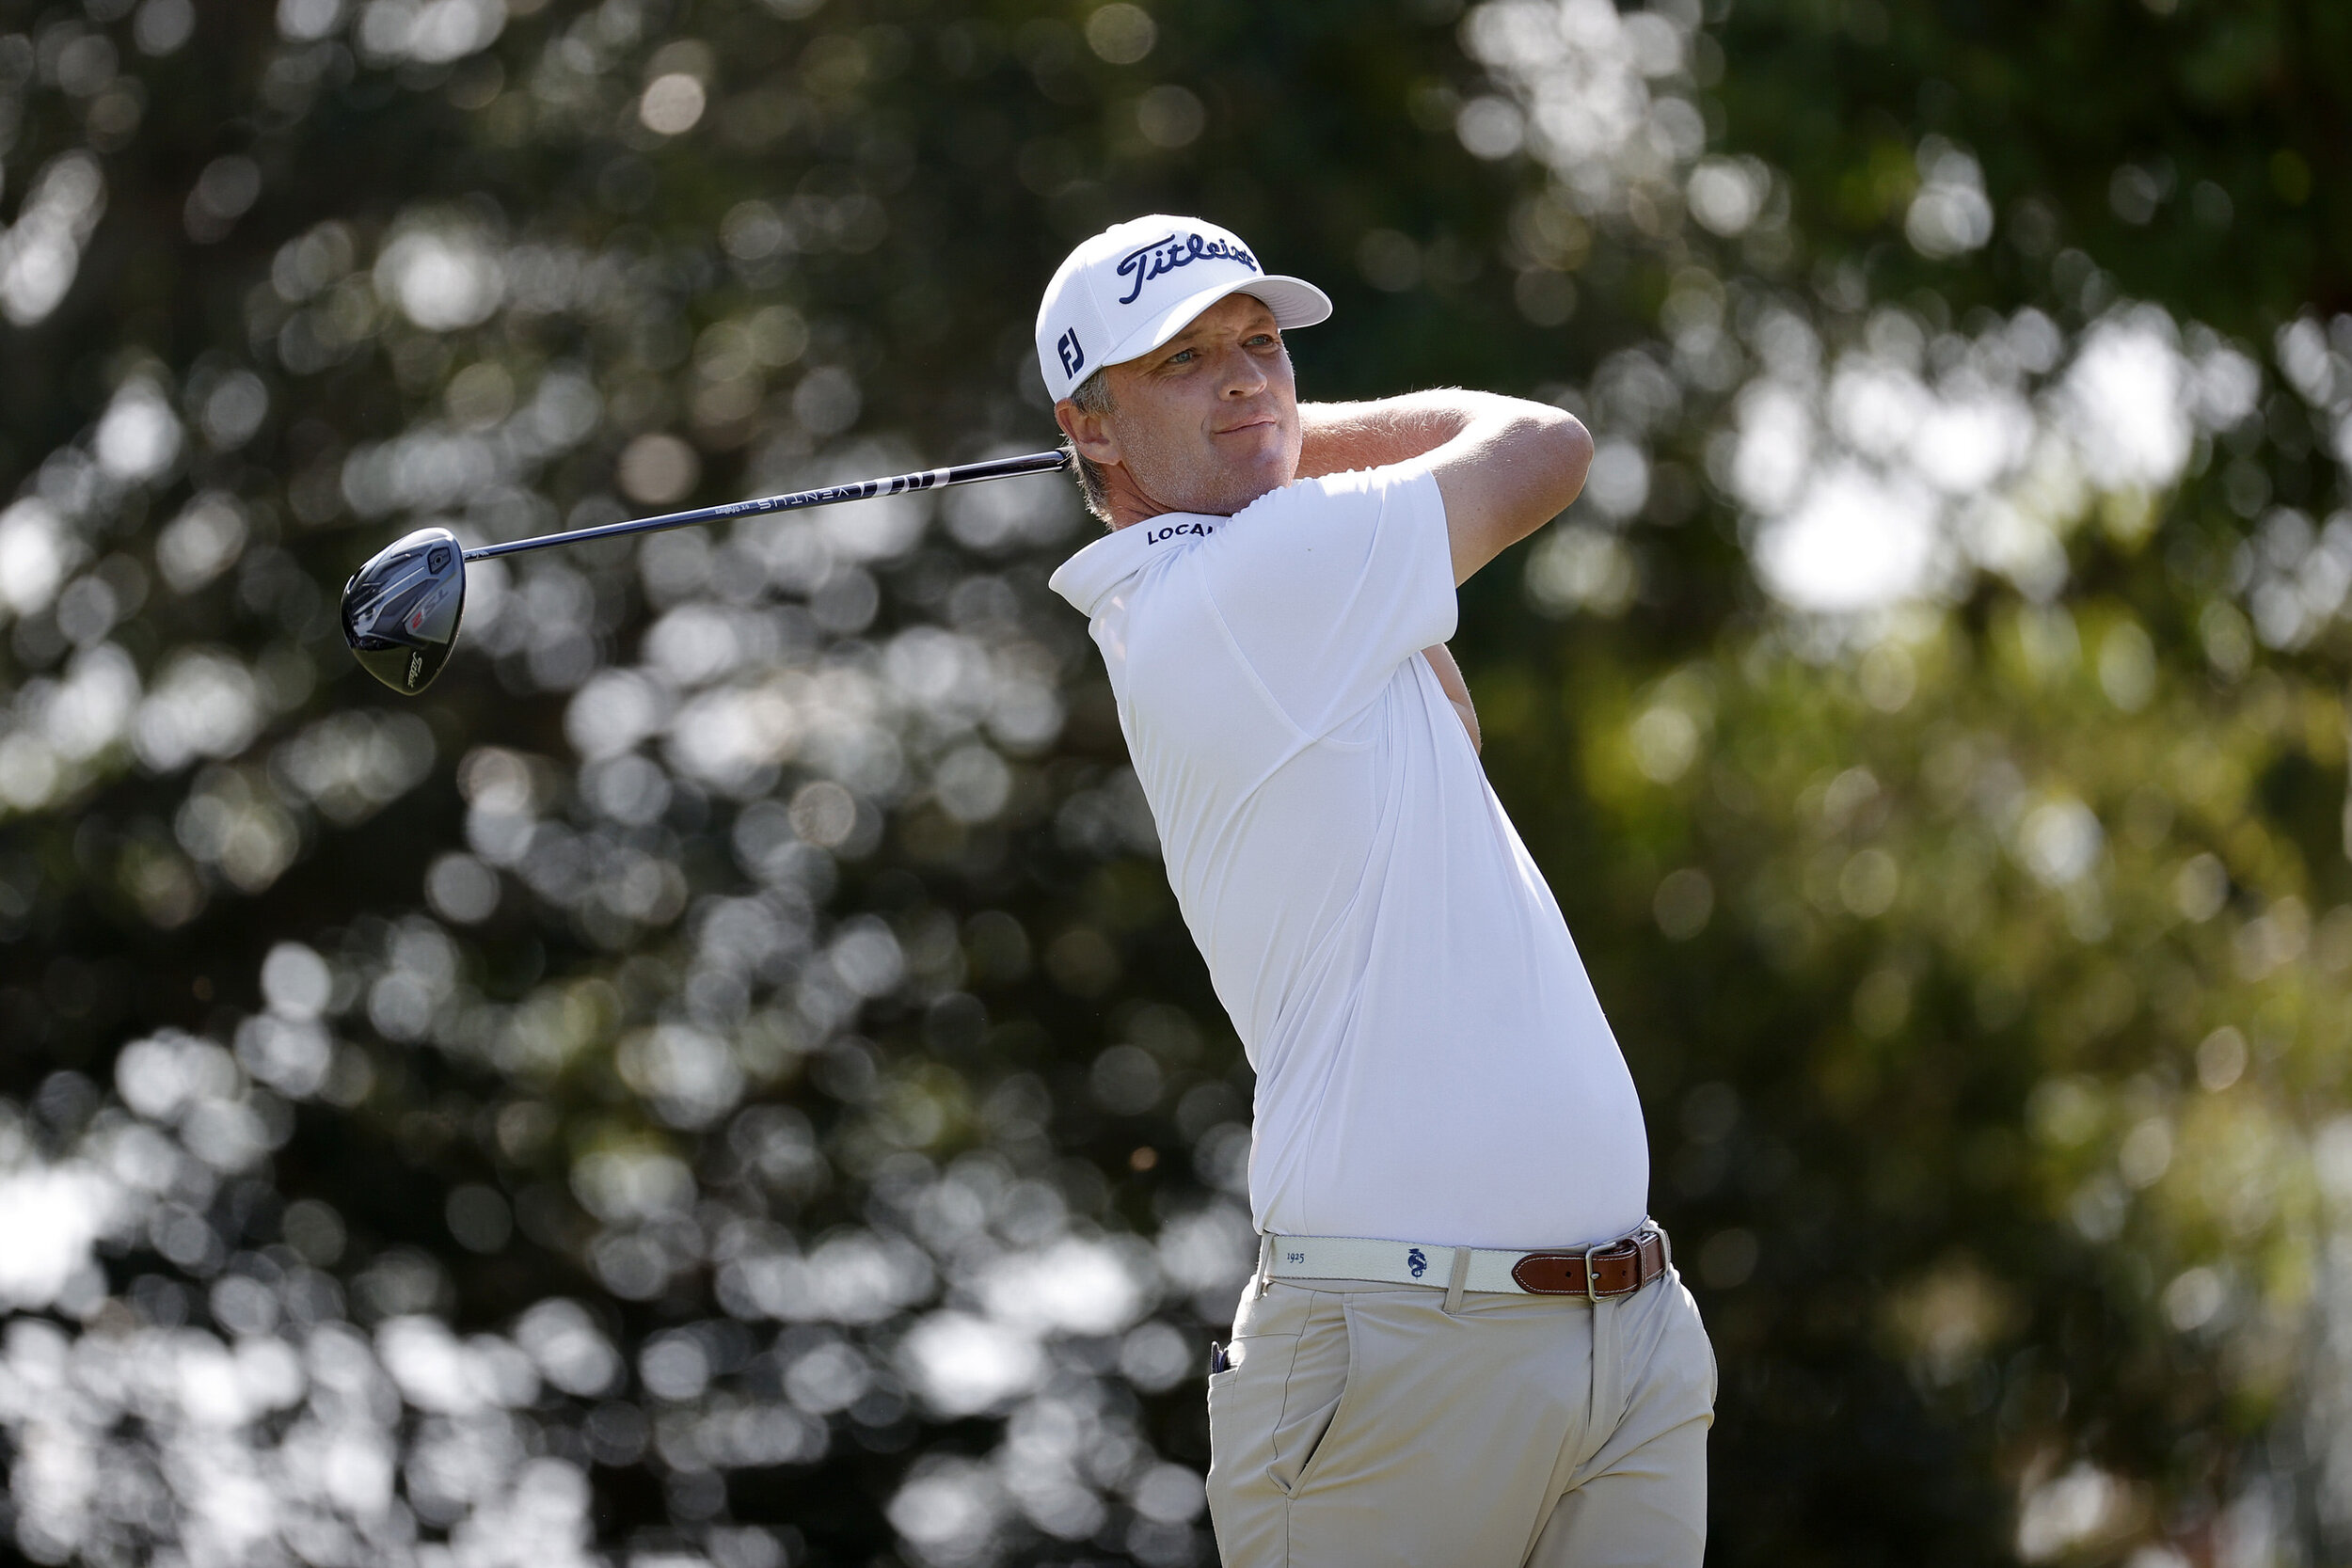  PALM BEACH GARDENS, FLORIDA - MARCH 18: Matt Jones of Australia plays his shot from the 14th tee during the first round of The Honda Classic at PGA National Champion course on March 18, 2021 in Palm Beach Gardens, Florida. (Photo by Jared C. Tilton/